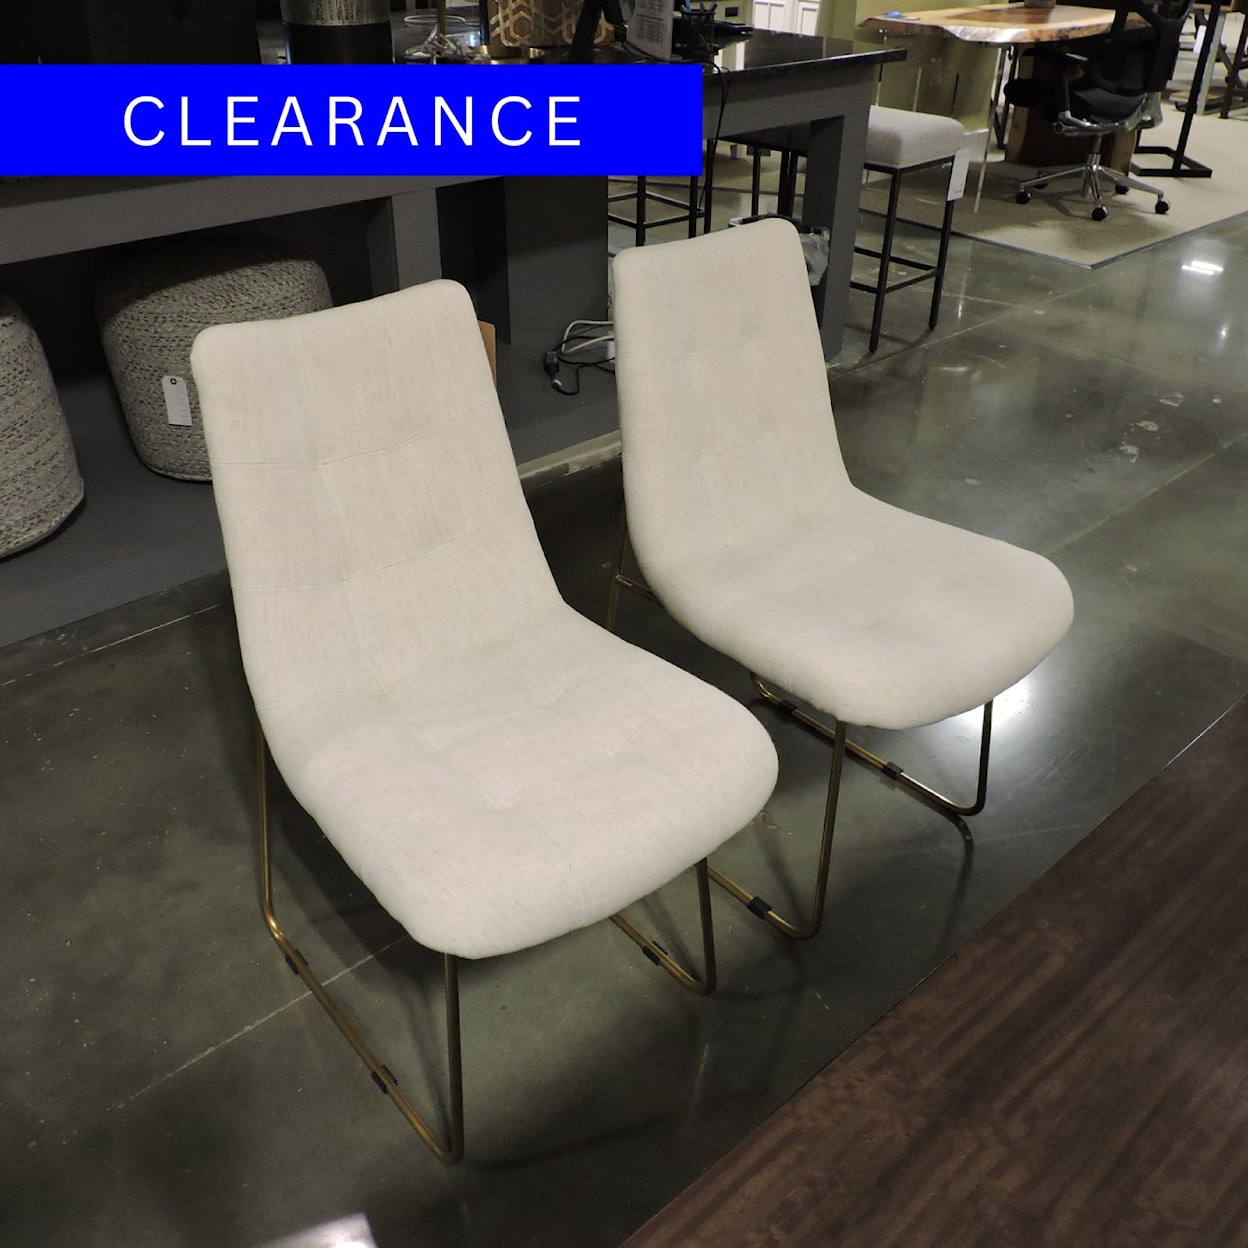 Miscellaneous Clearance Pair of Dining Chairs